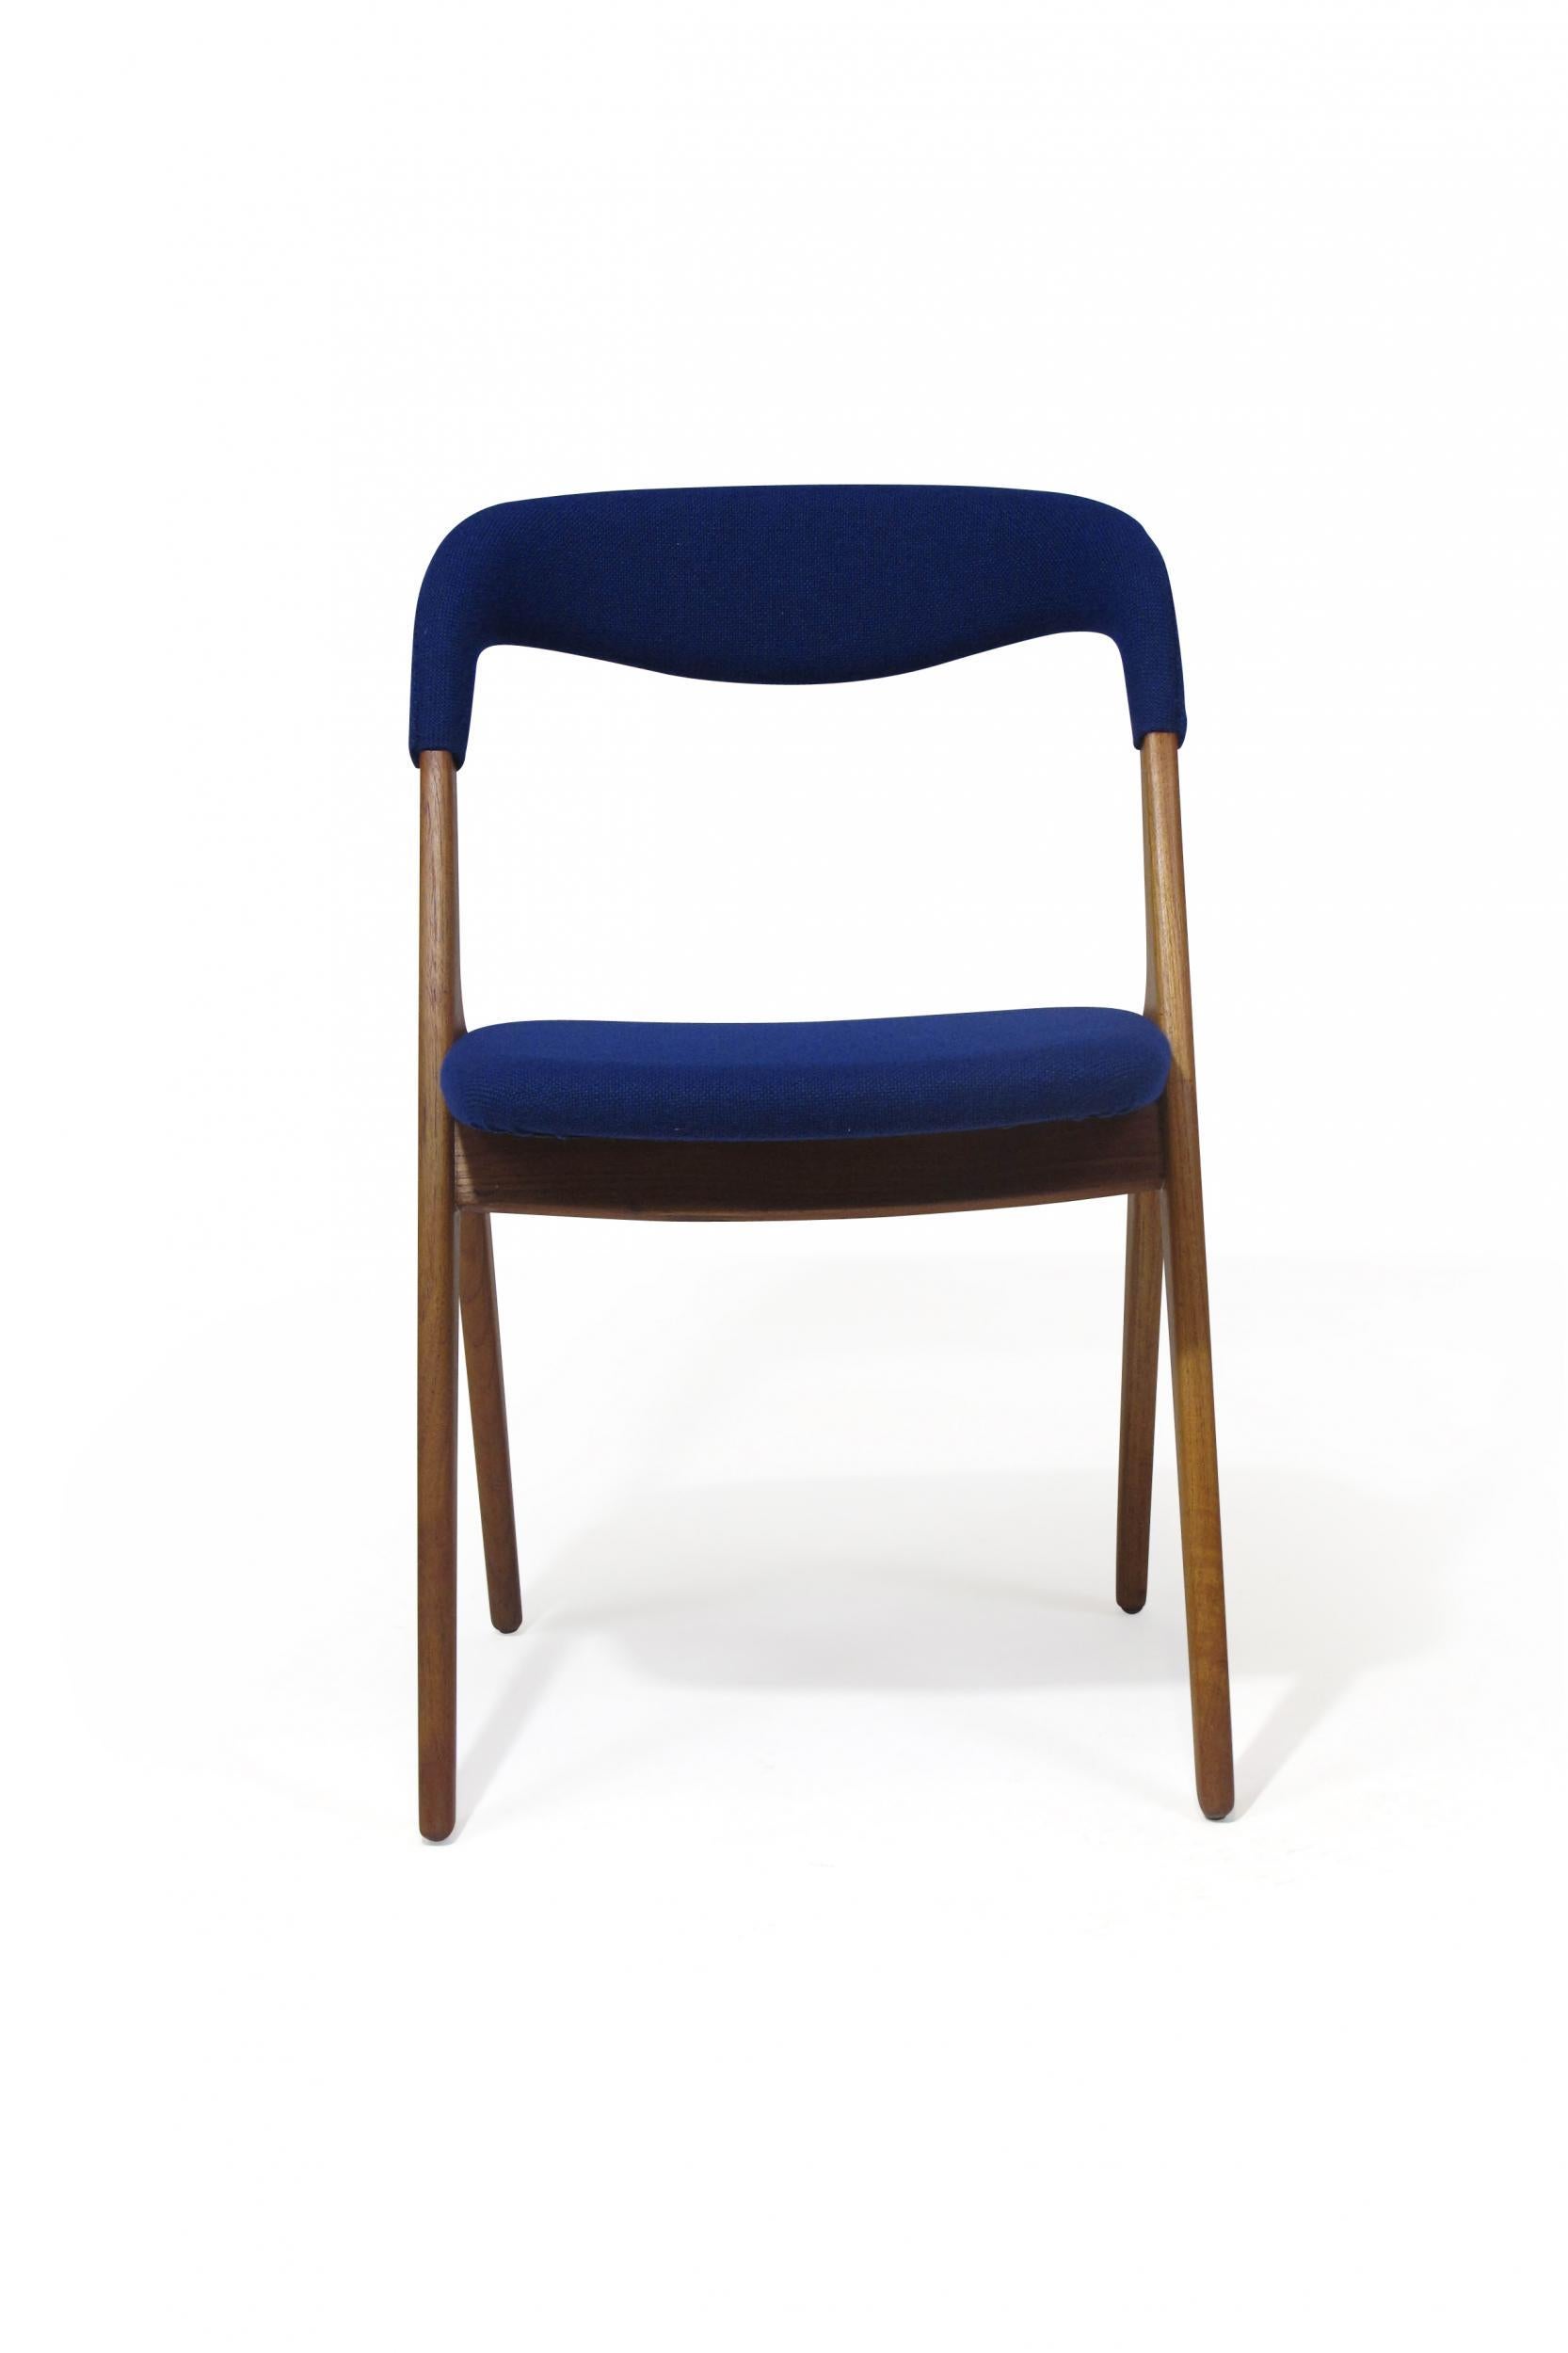 Danish teak dining chairs designed by Johannes Andersen for Vamo Sonderborg, model 'Sonja' Denmark circa 1960. The chairs are crafted of solid teak frames with a dramatic curved backrests. Newly upholstered in a blue wool.